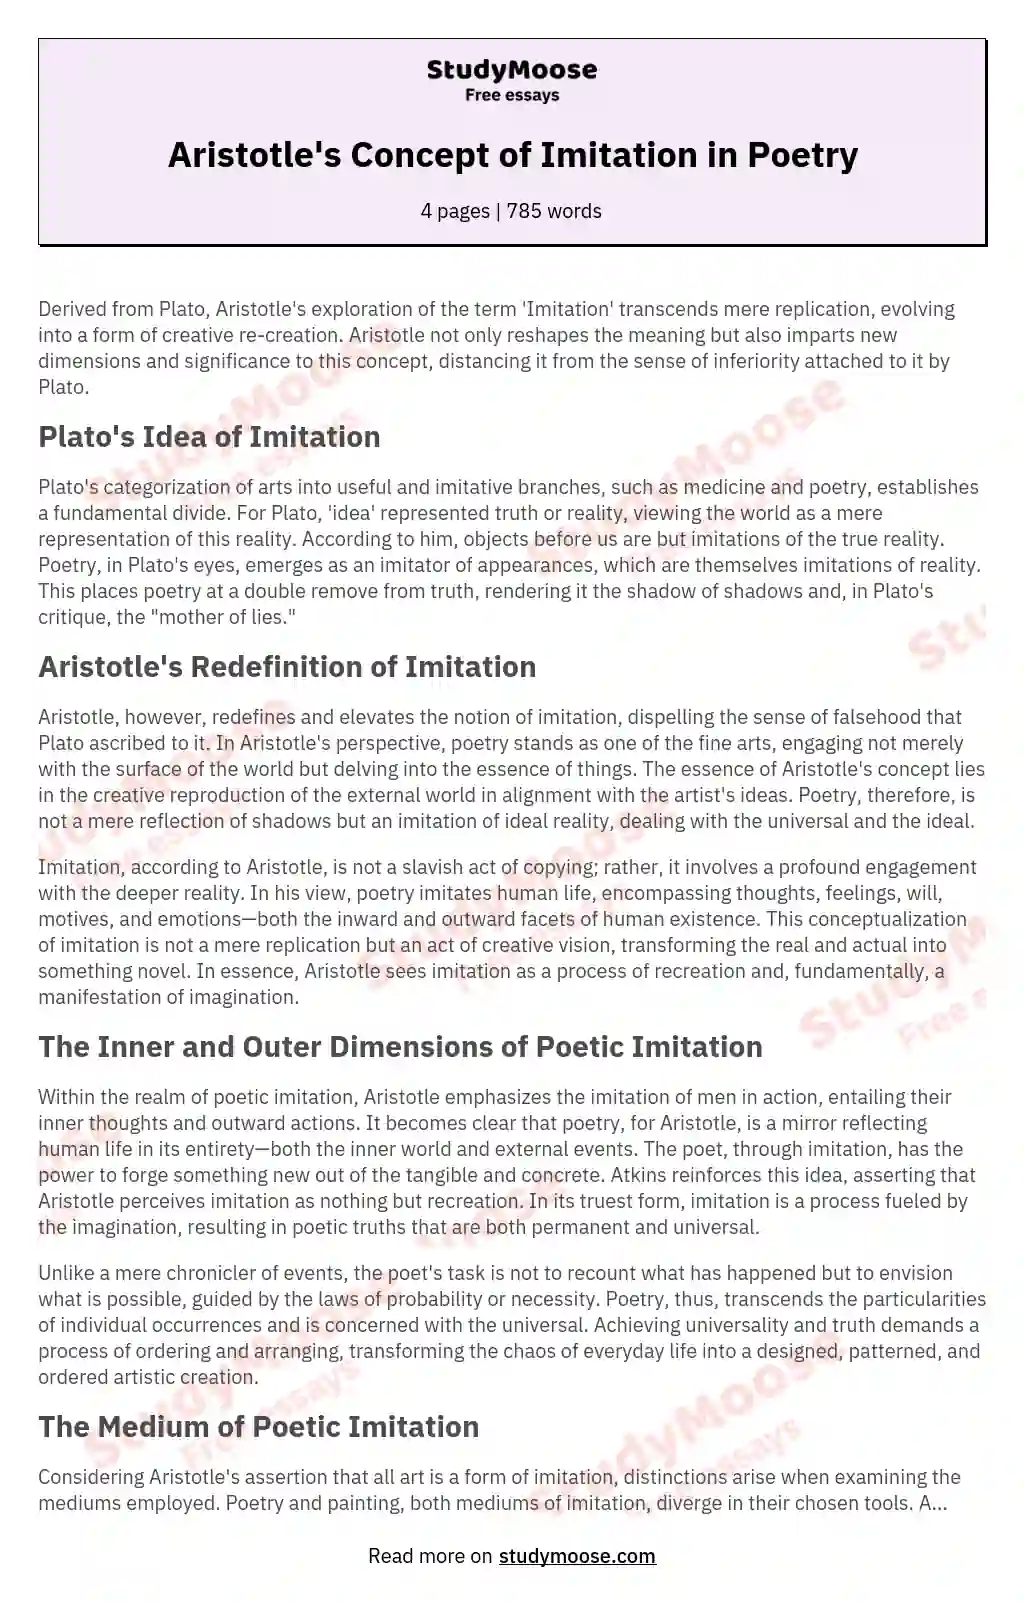 research paper on aristotle theory of imitation